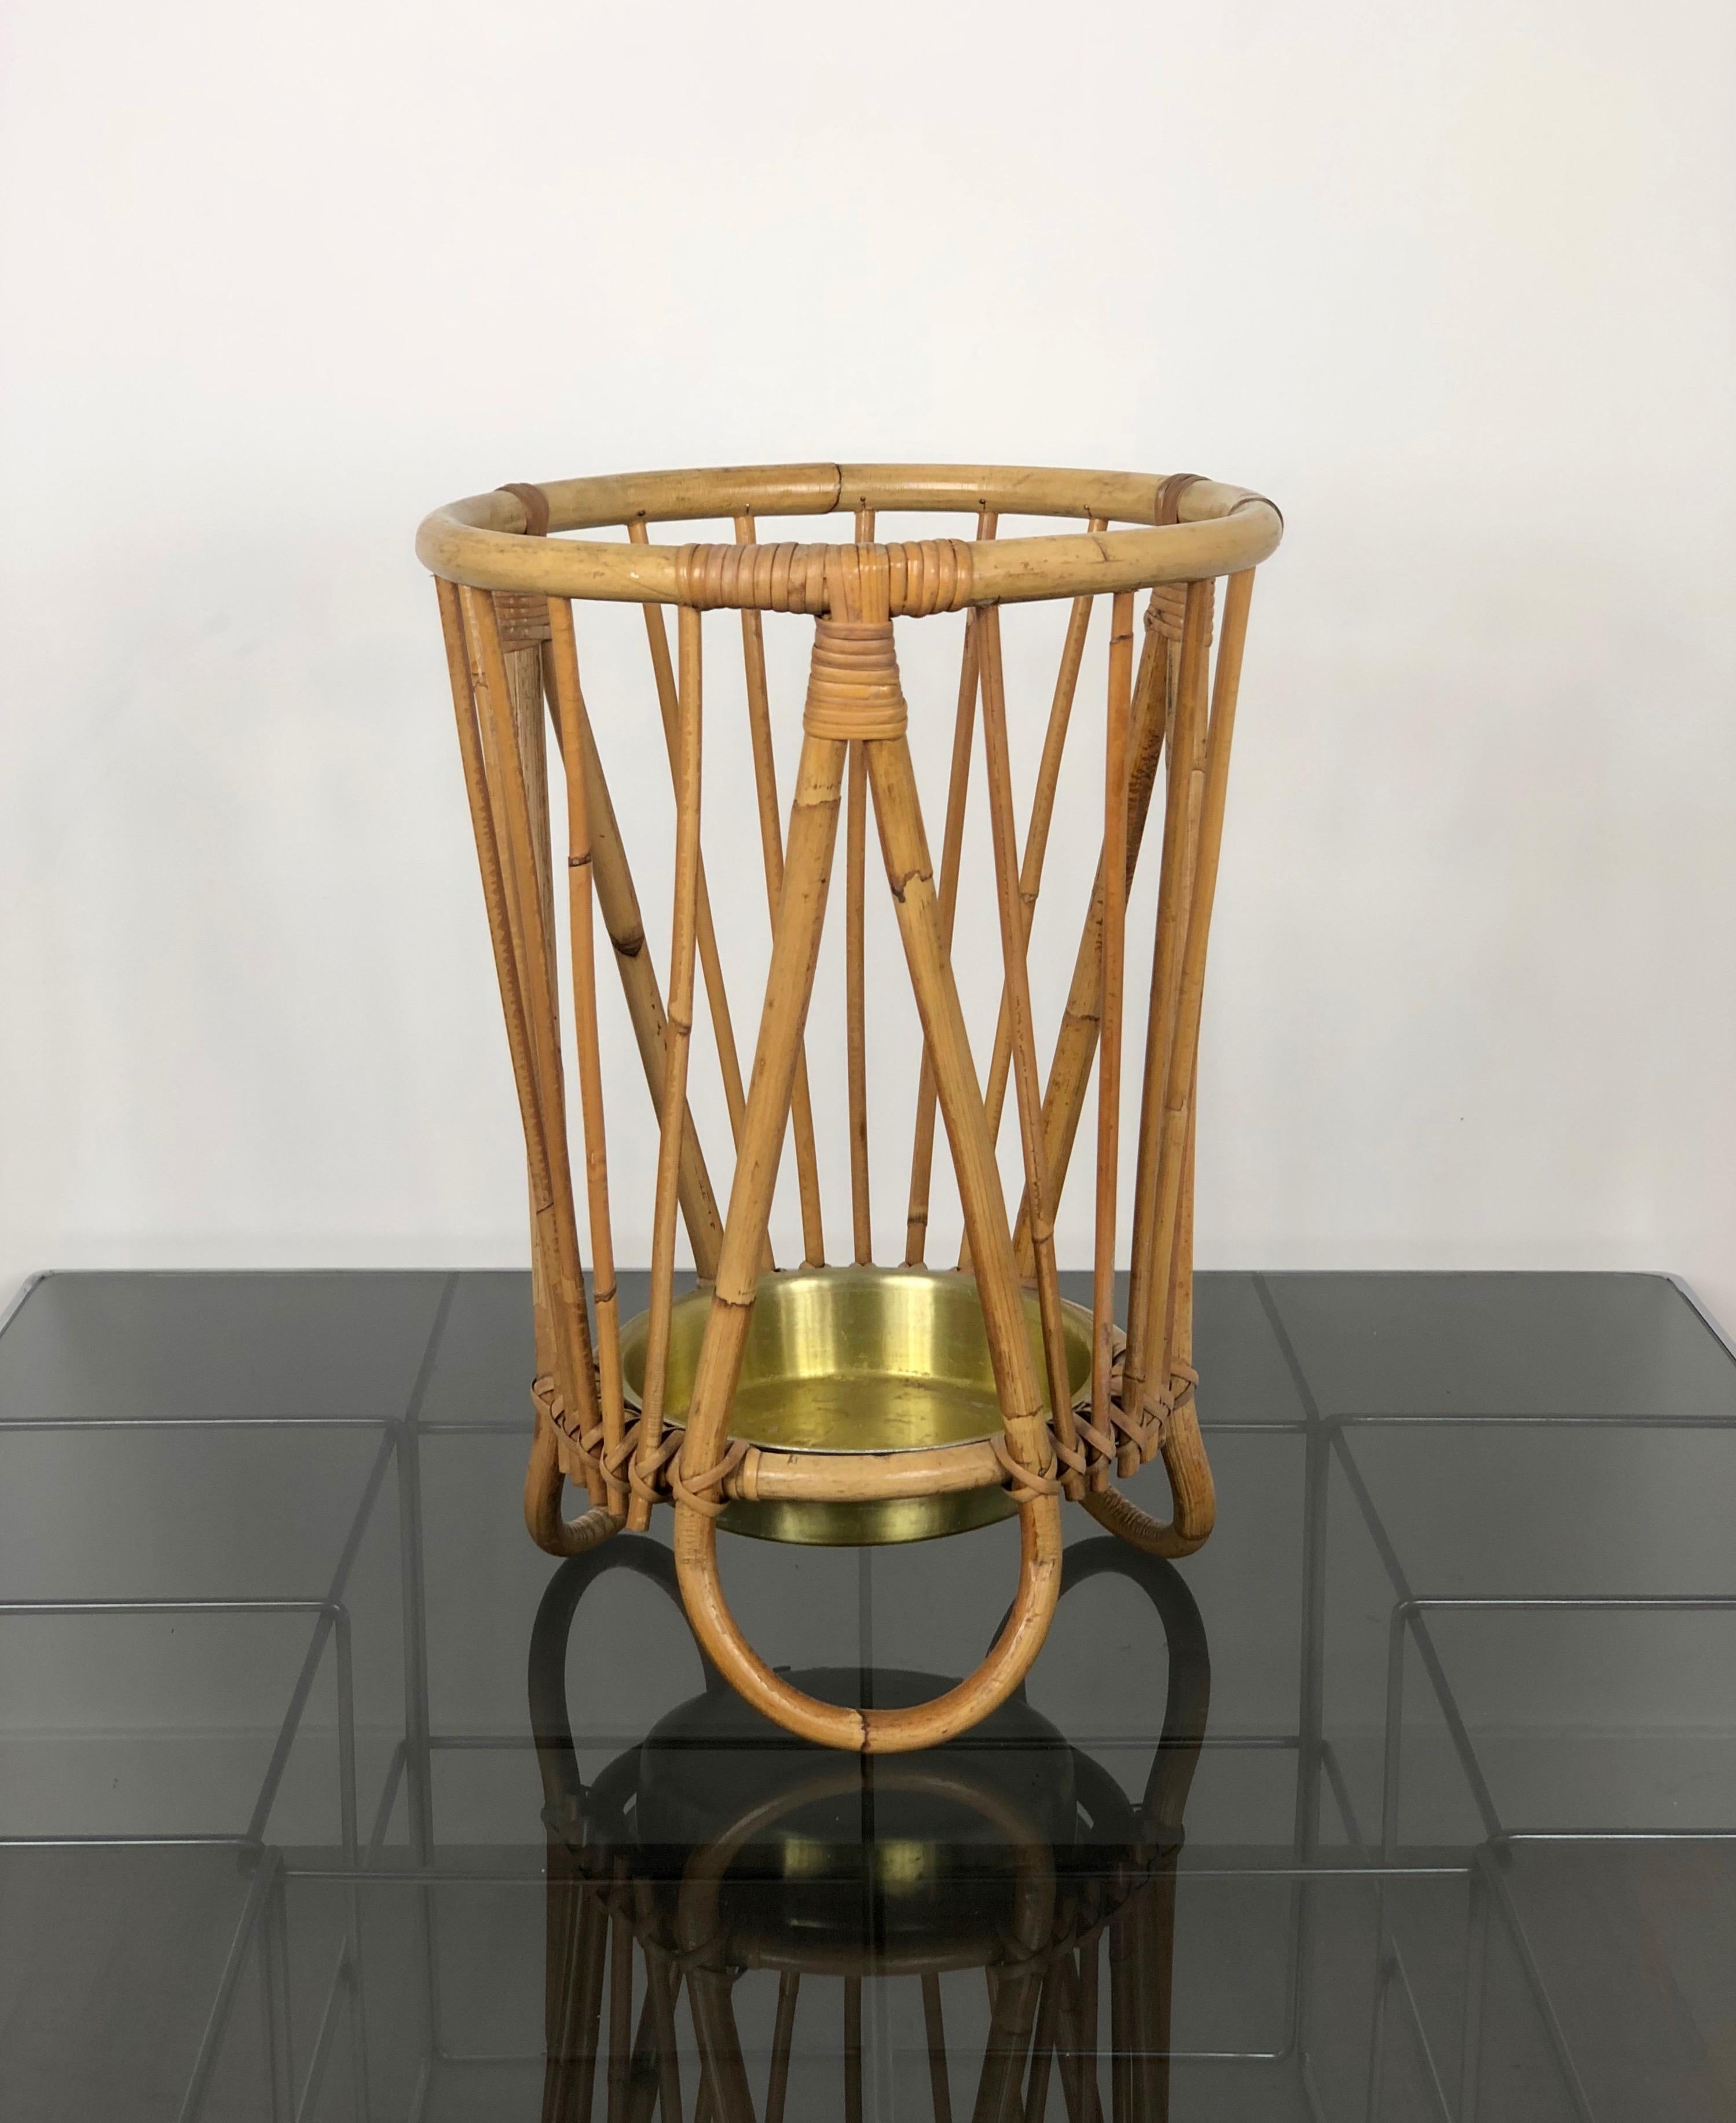 Umbrella stand made of bamboo and golden metal, Franco Albini style, Italy, 1950s.
  